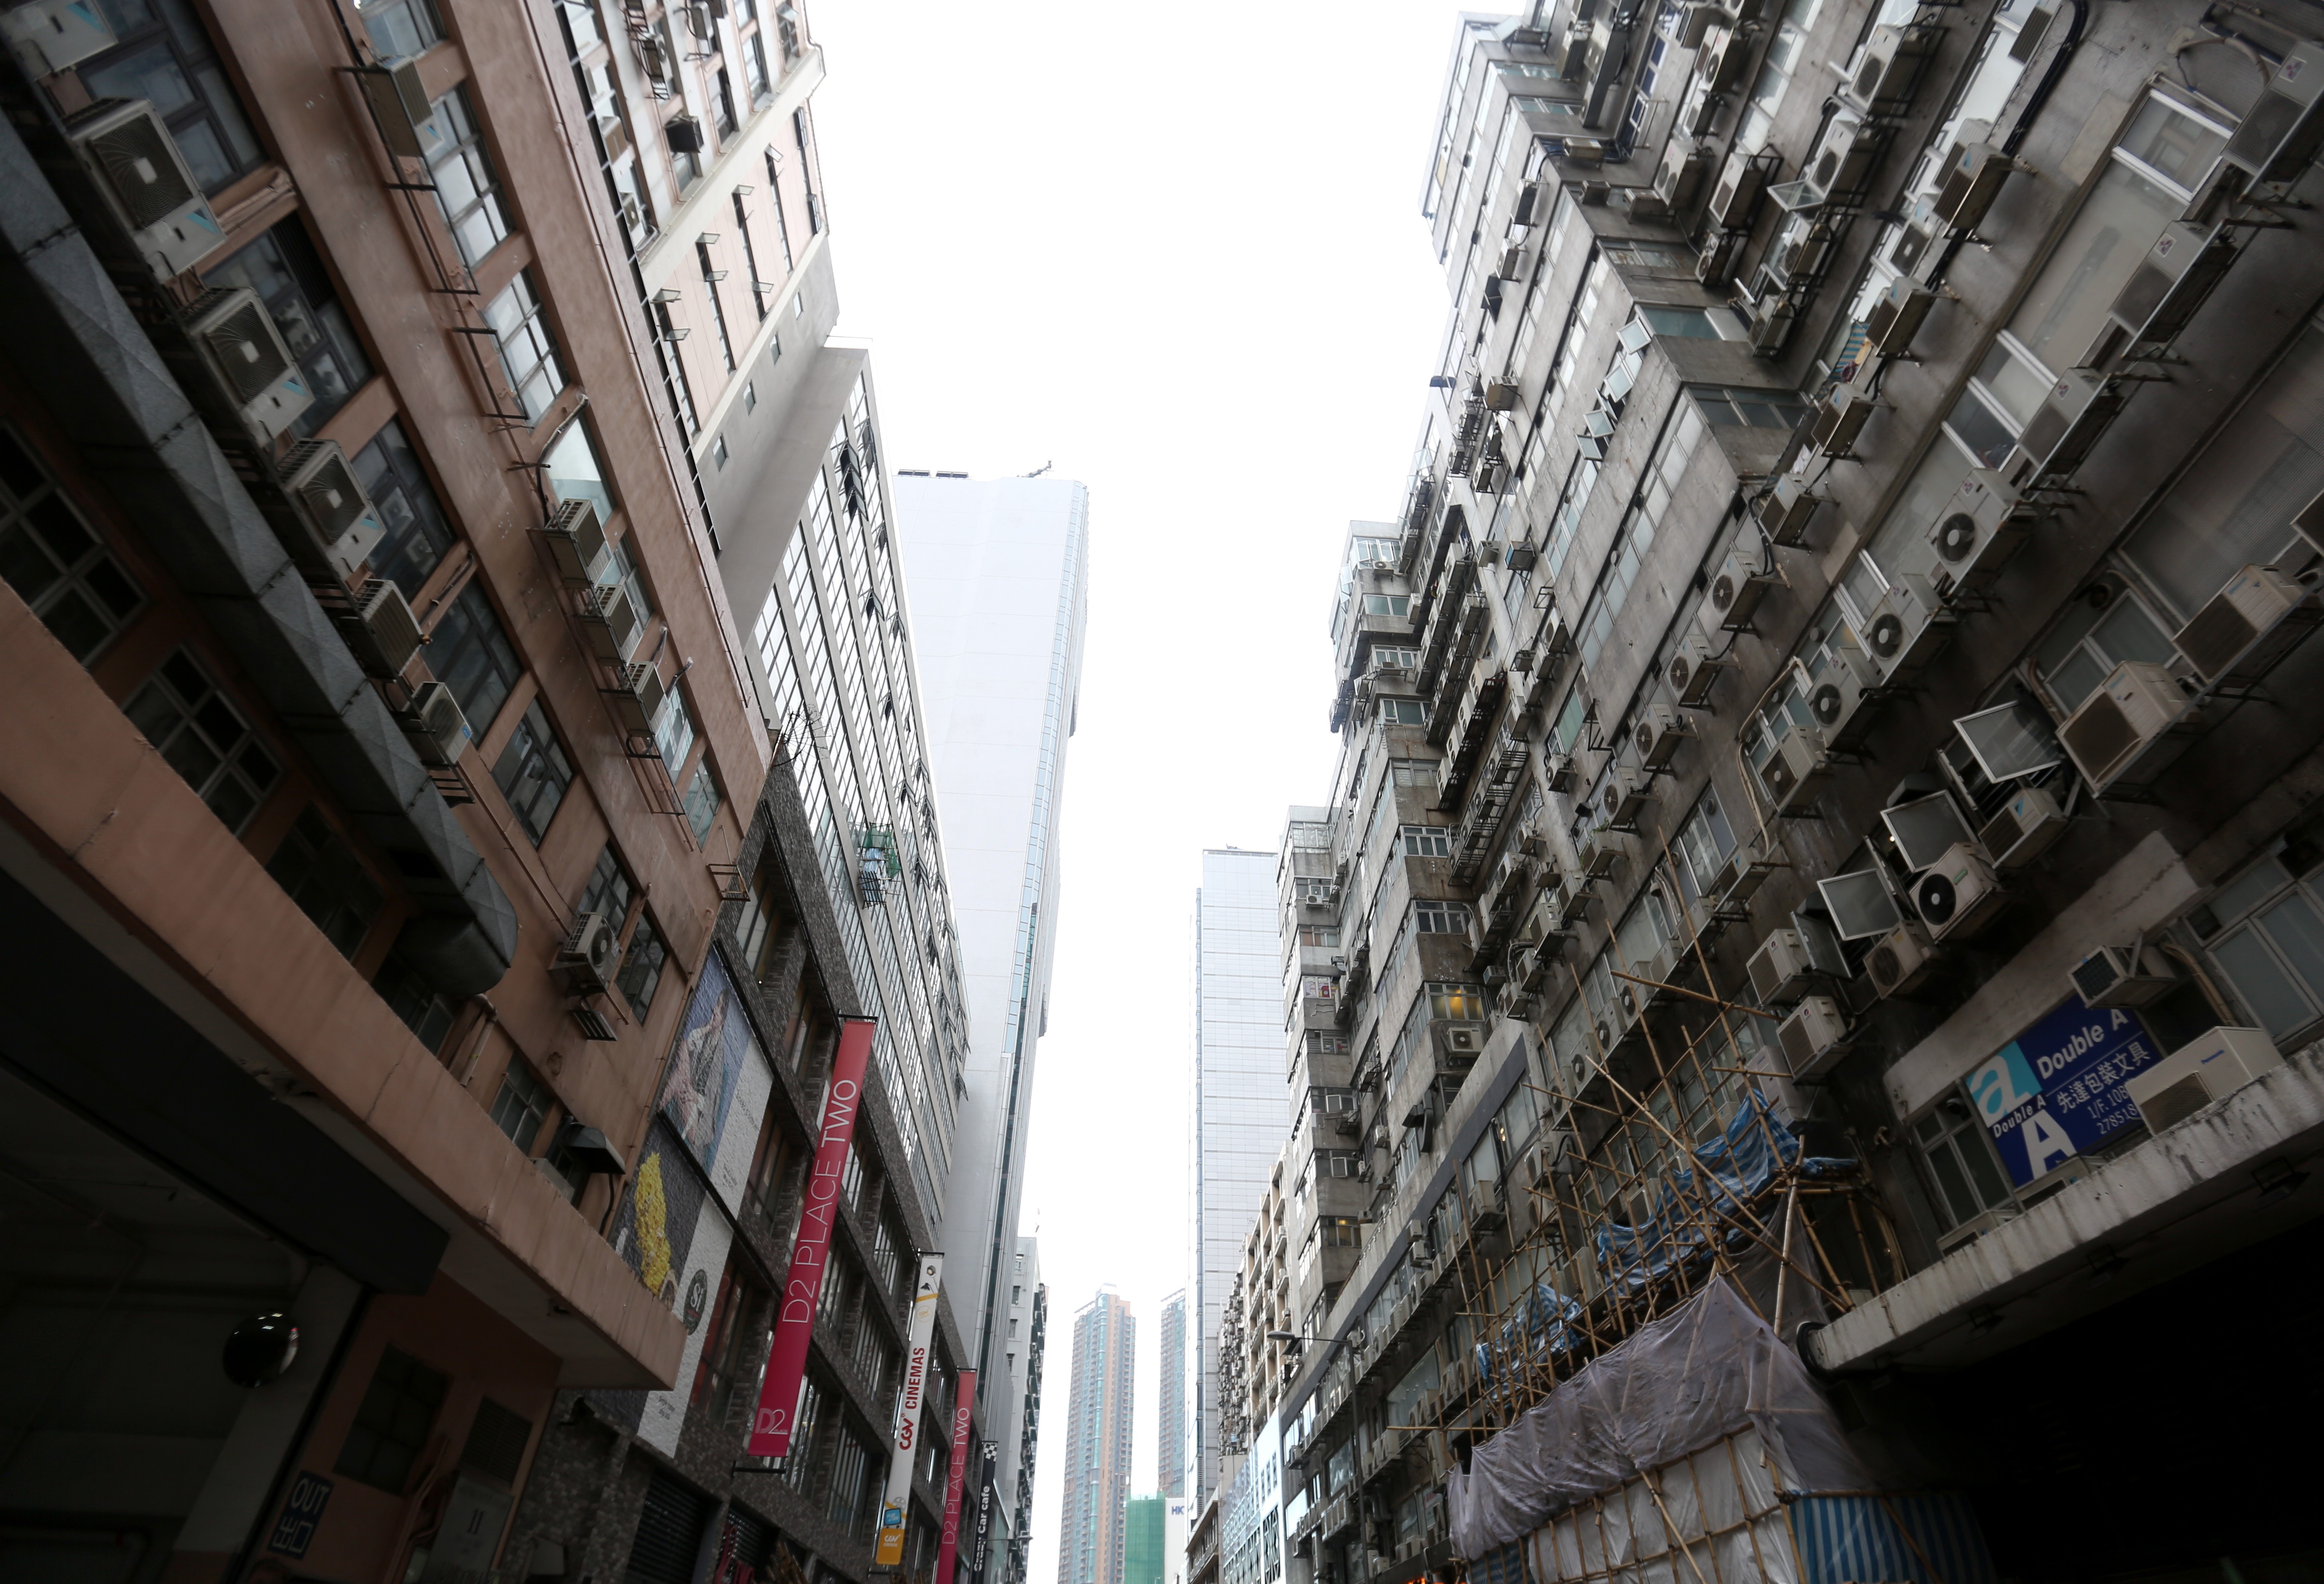 A typical facade of Hong Kong where commercial and residential units coexist in these Lai Chi Kok buildings in 2018. Photo: Xiaomei Chen